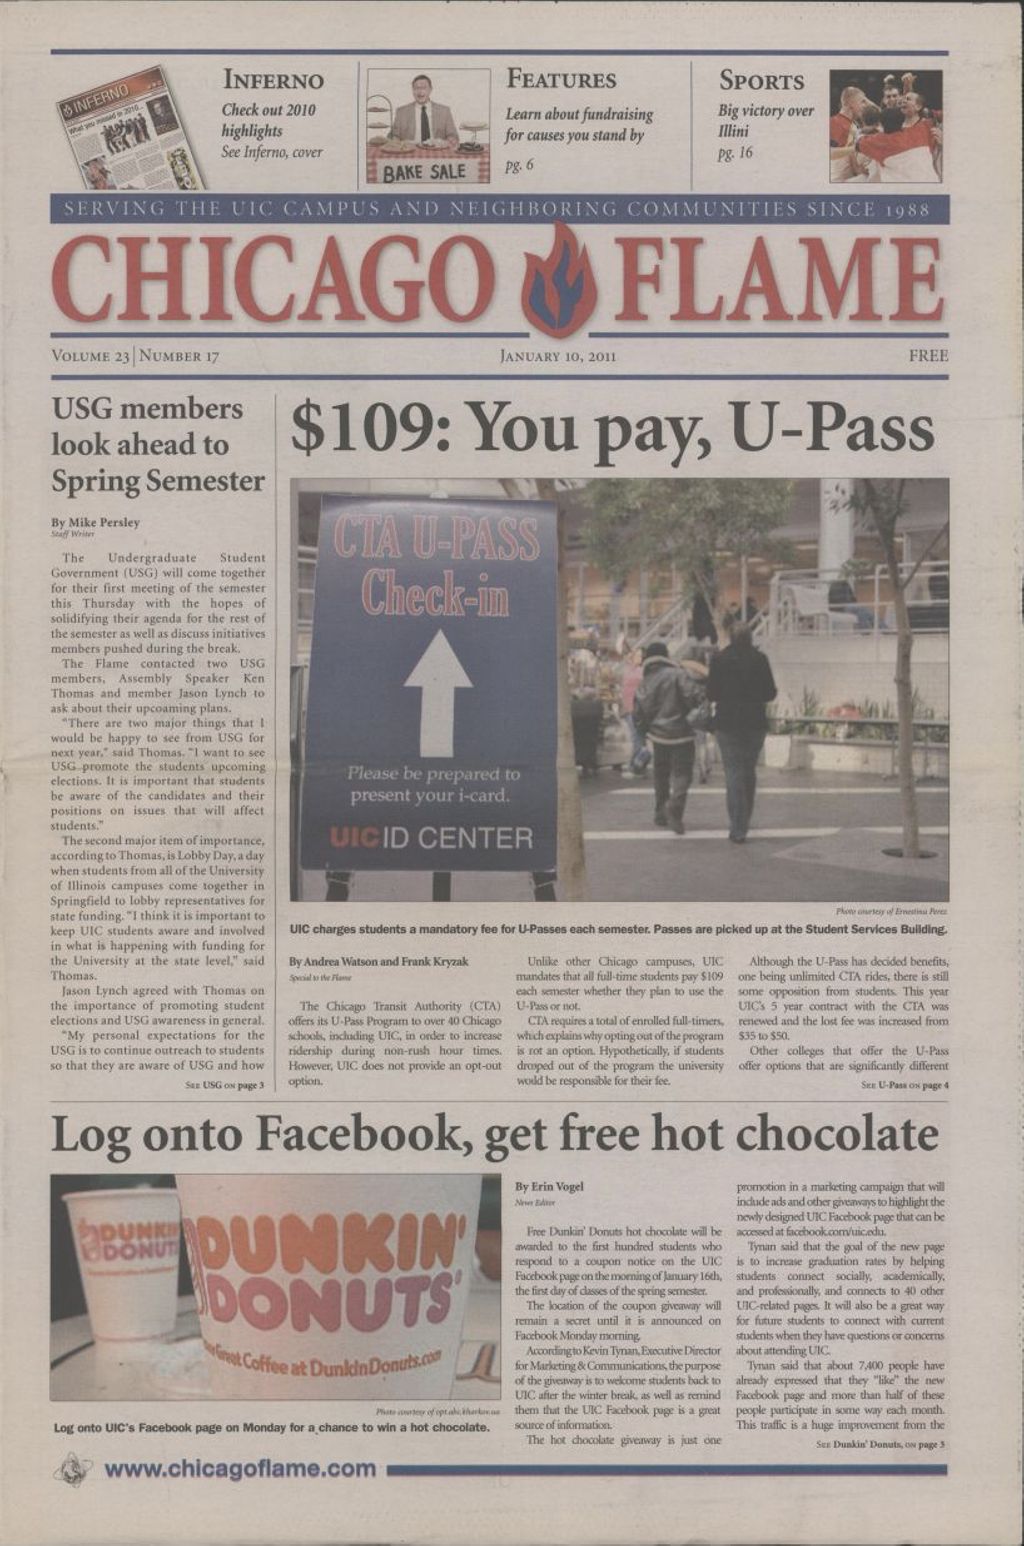 Chicago Flame (January 10, 2011)